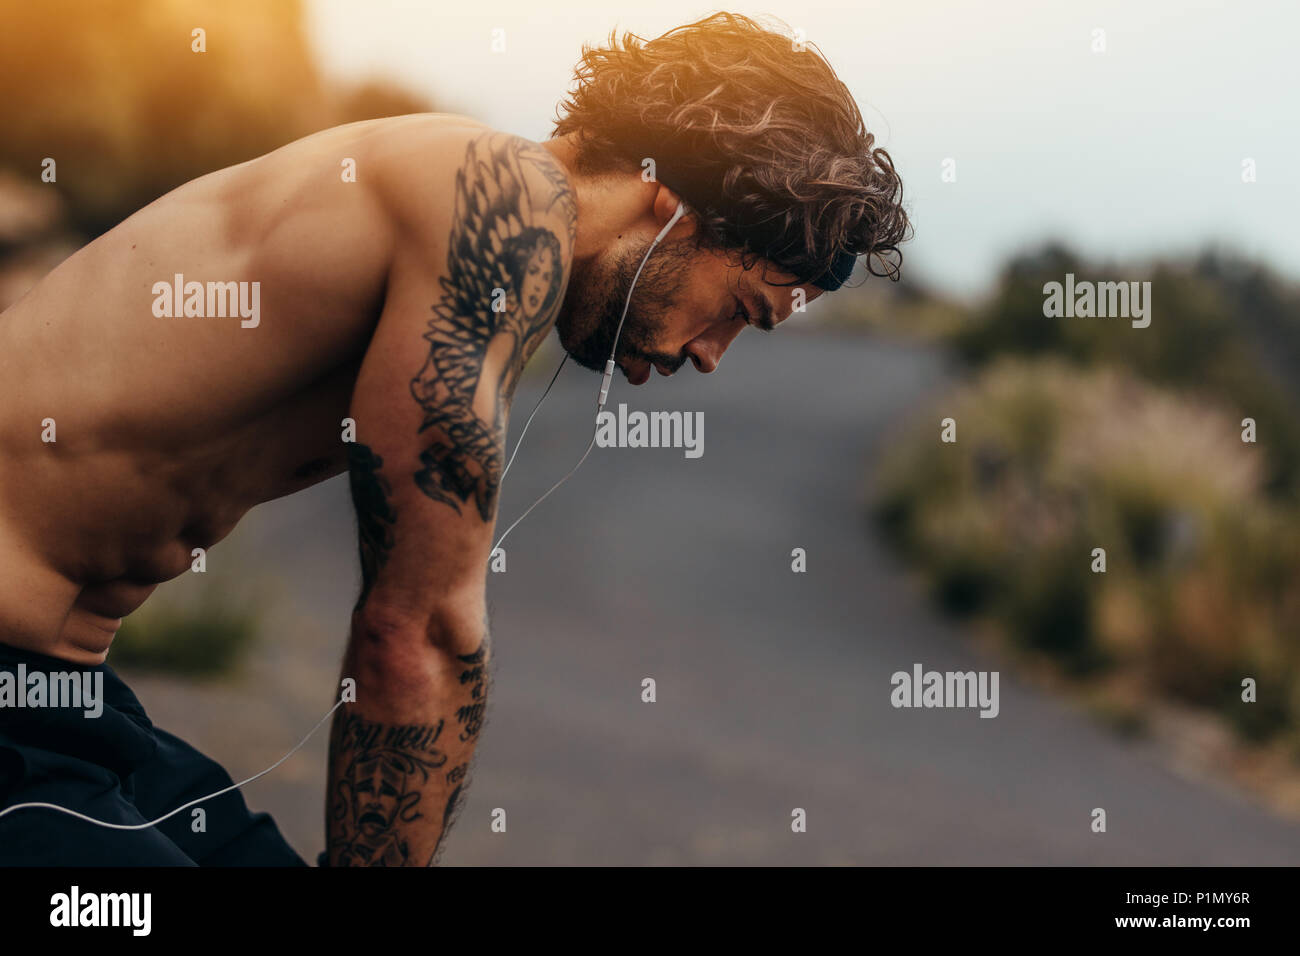 Side view of muscular man taking rest after a run outdoors. Sportsman looking tired after running training on mountain road. Stock Photo